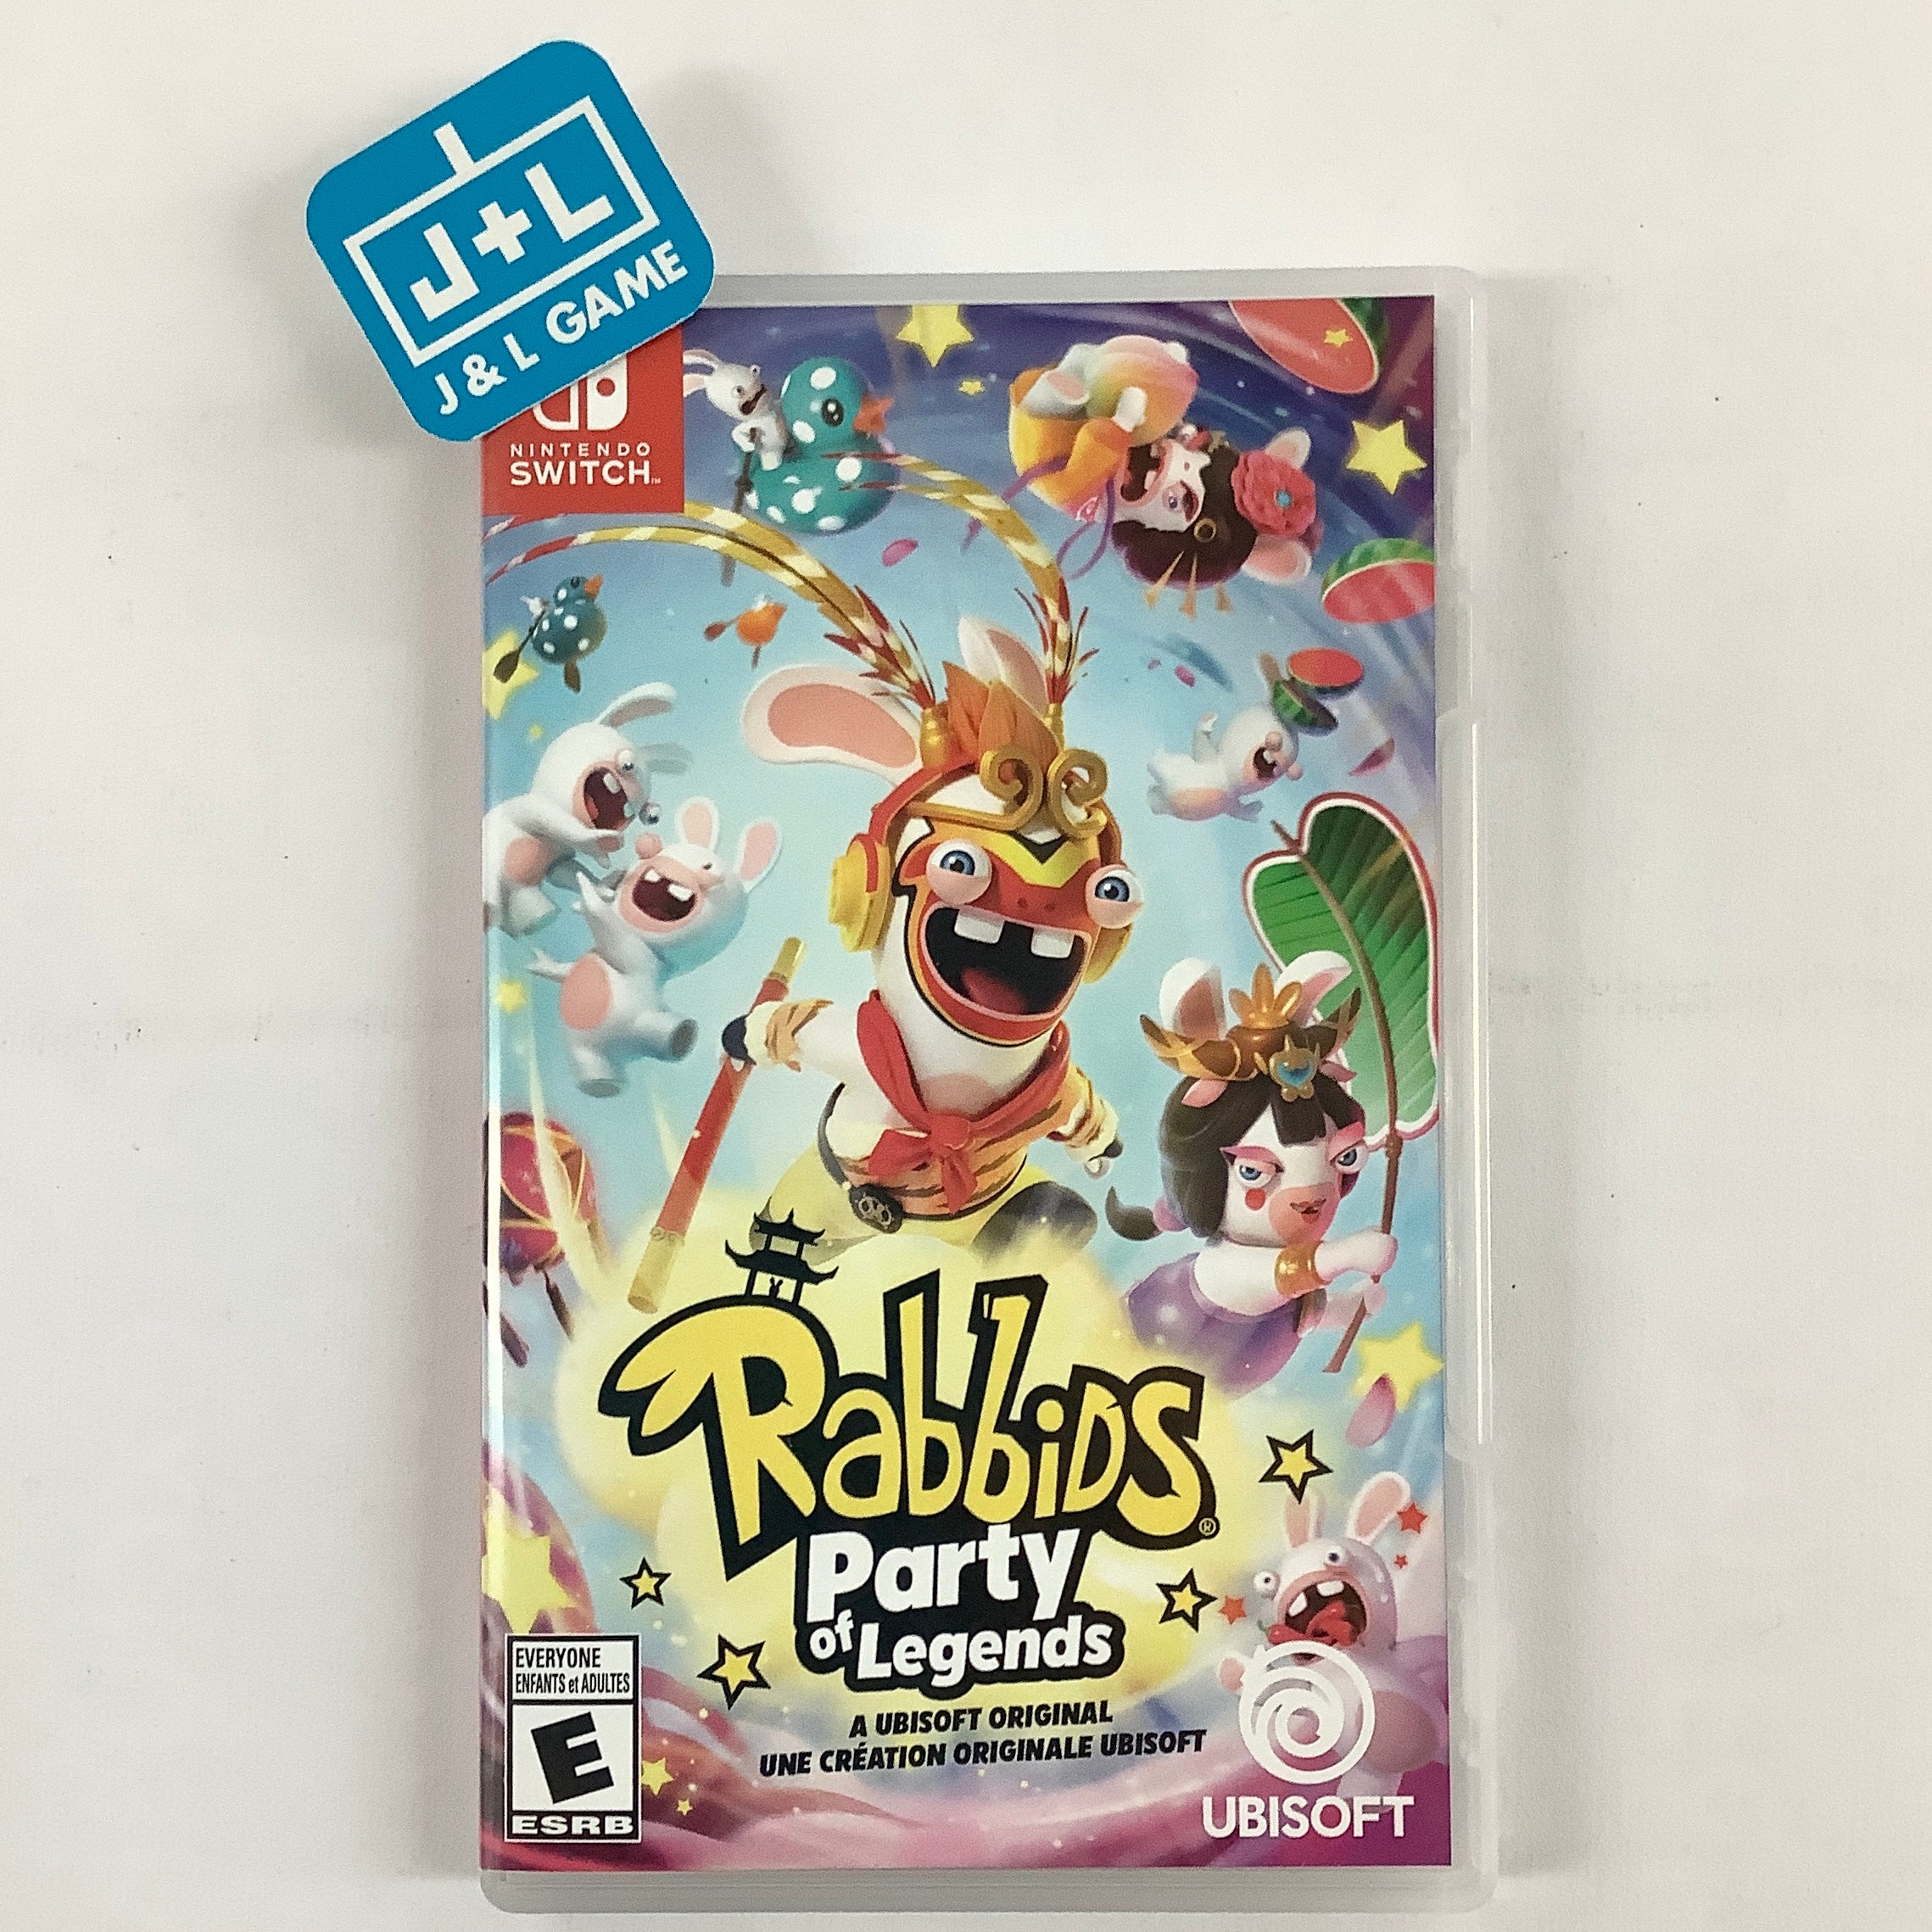 Rabbids: Party of Legends - (NSW) Nintendo Switch [UNBOXING] Video Games Ubisoft   